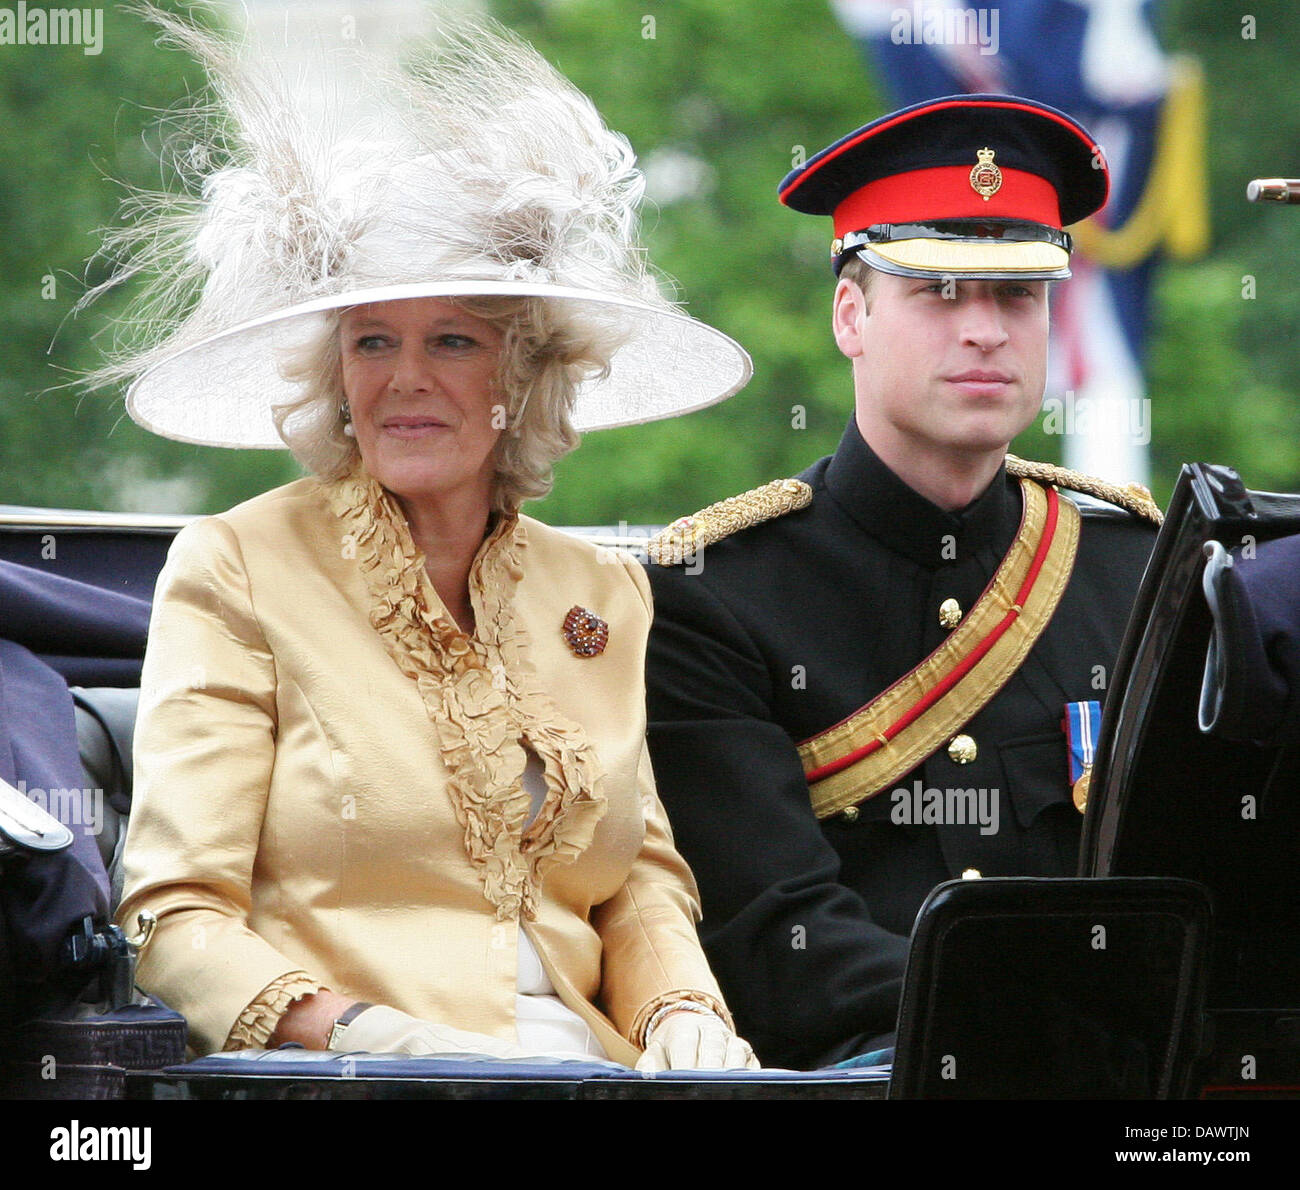 HRH Prince William of Wales (R) and Camilla Duchess of Cornwall (L) pictured during the annual Trooping the Colour parade in honour to The Queen's birthday at Buckingham Palace in London, United Kingdom, 16 June 2007. Photo: Royal Press Europe-A. Nieboer (NETHERLANDS OUT) Stock Photo